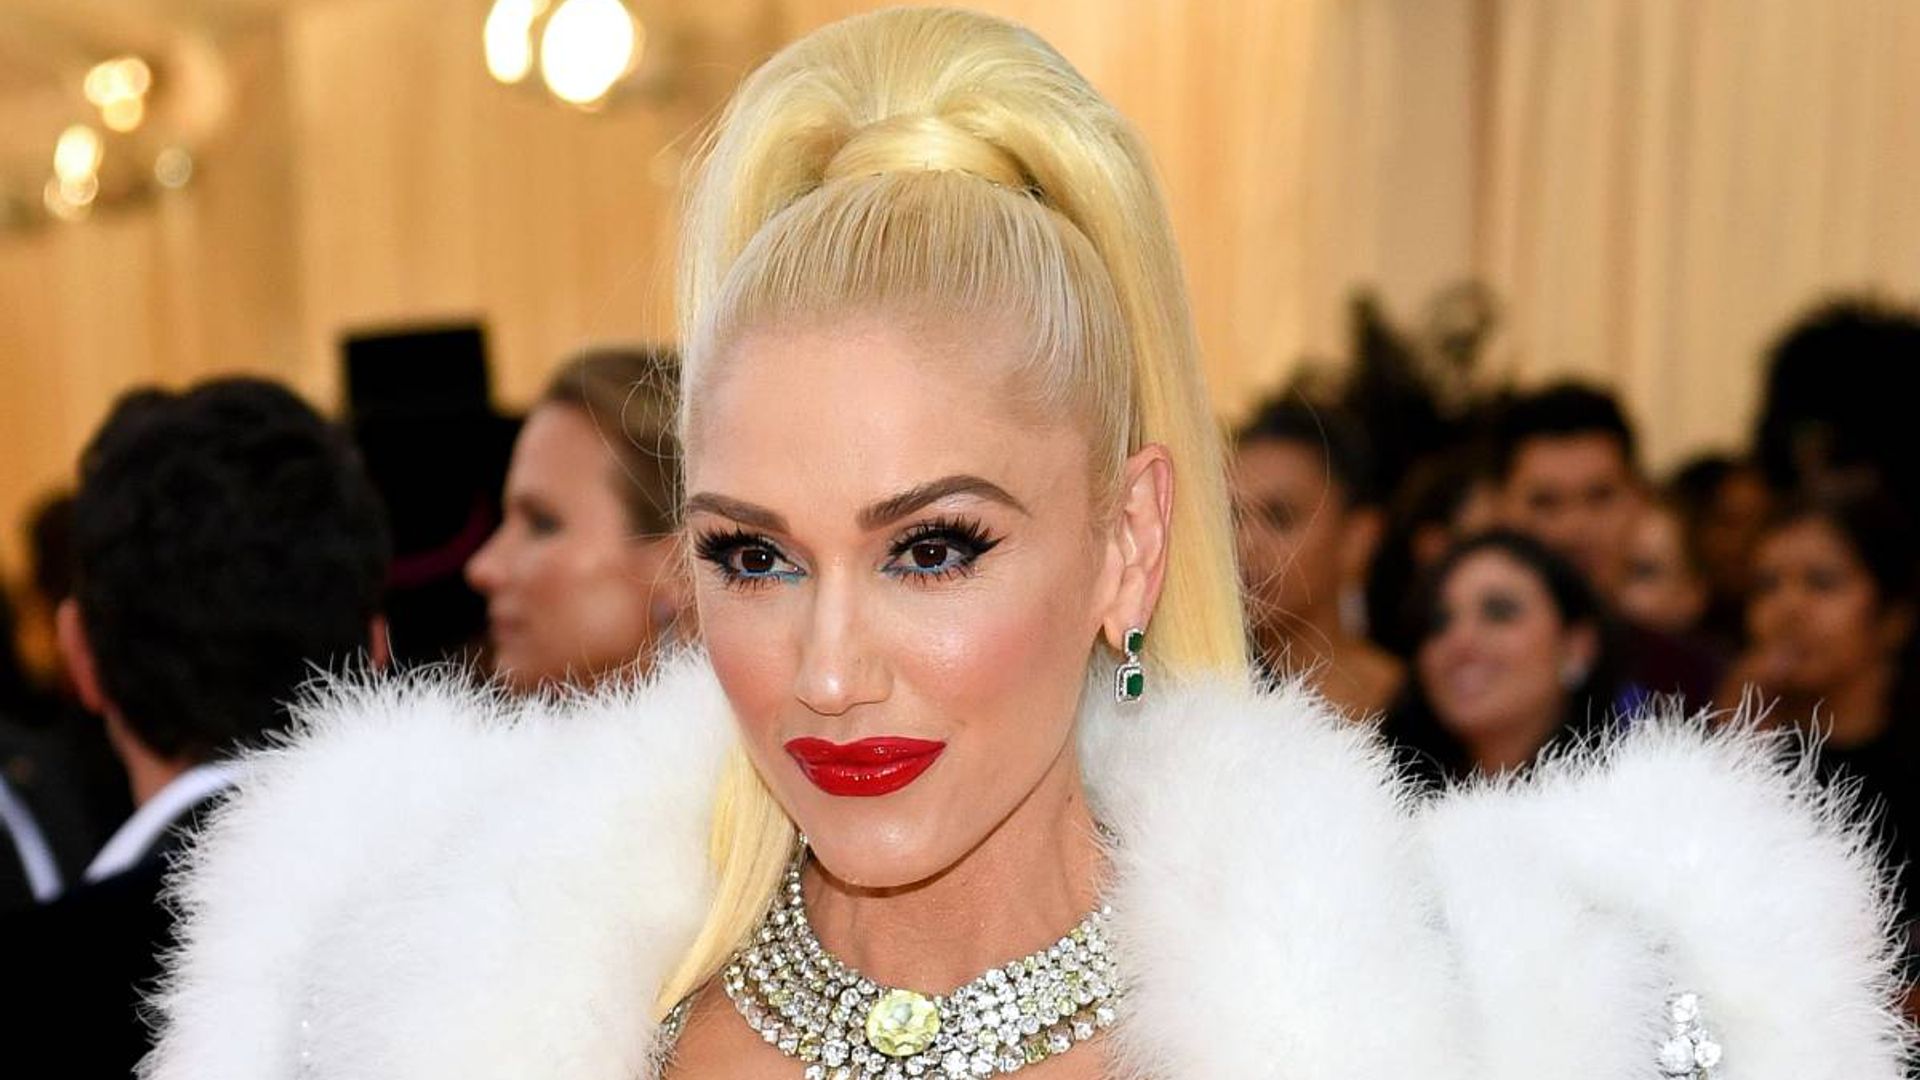 Gwen Stefani Pictured With Short Red Hair In Incredible Photo And She S Unrecognisable Hello